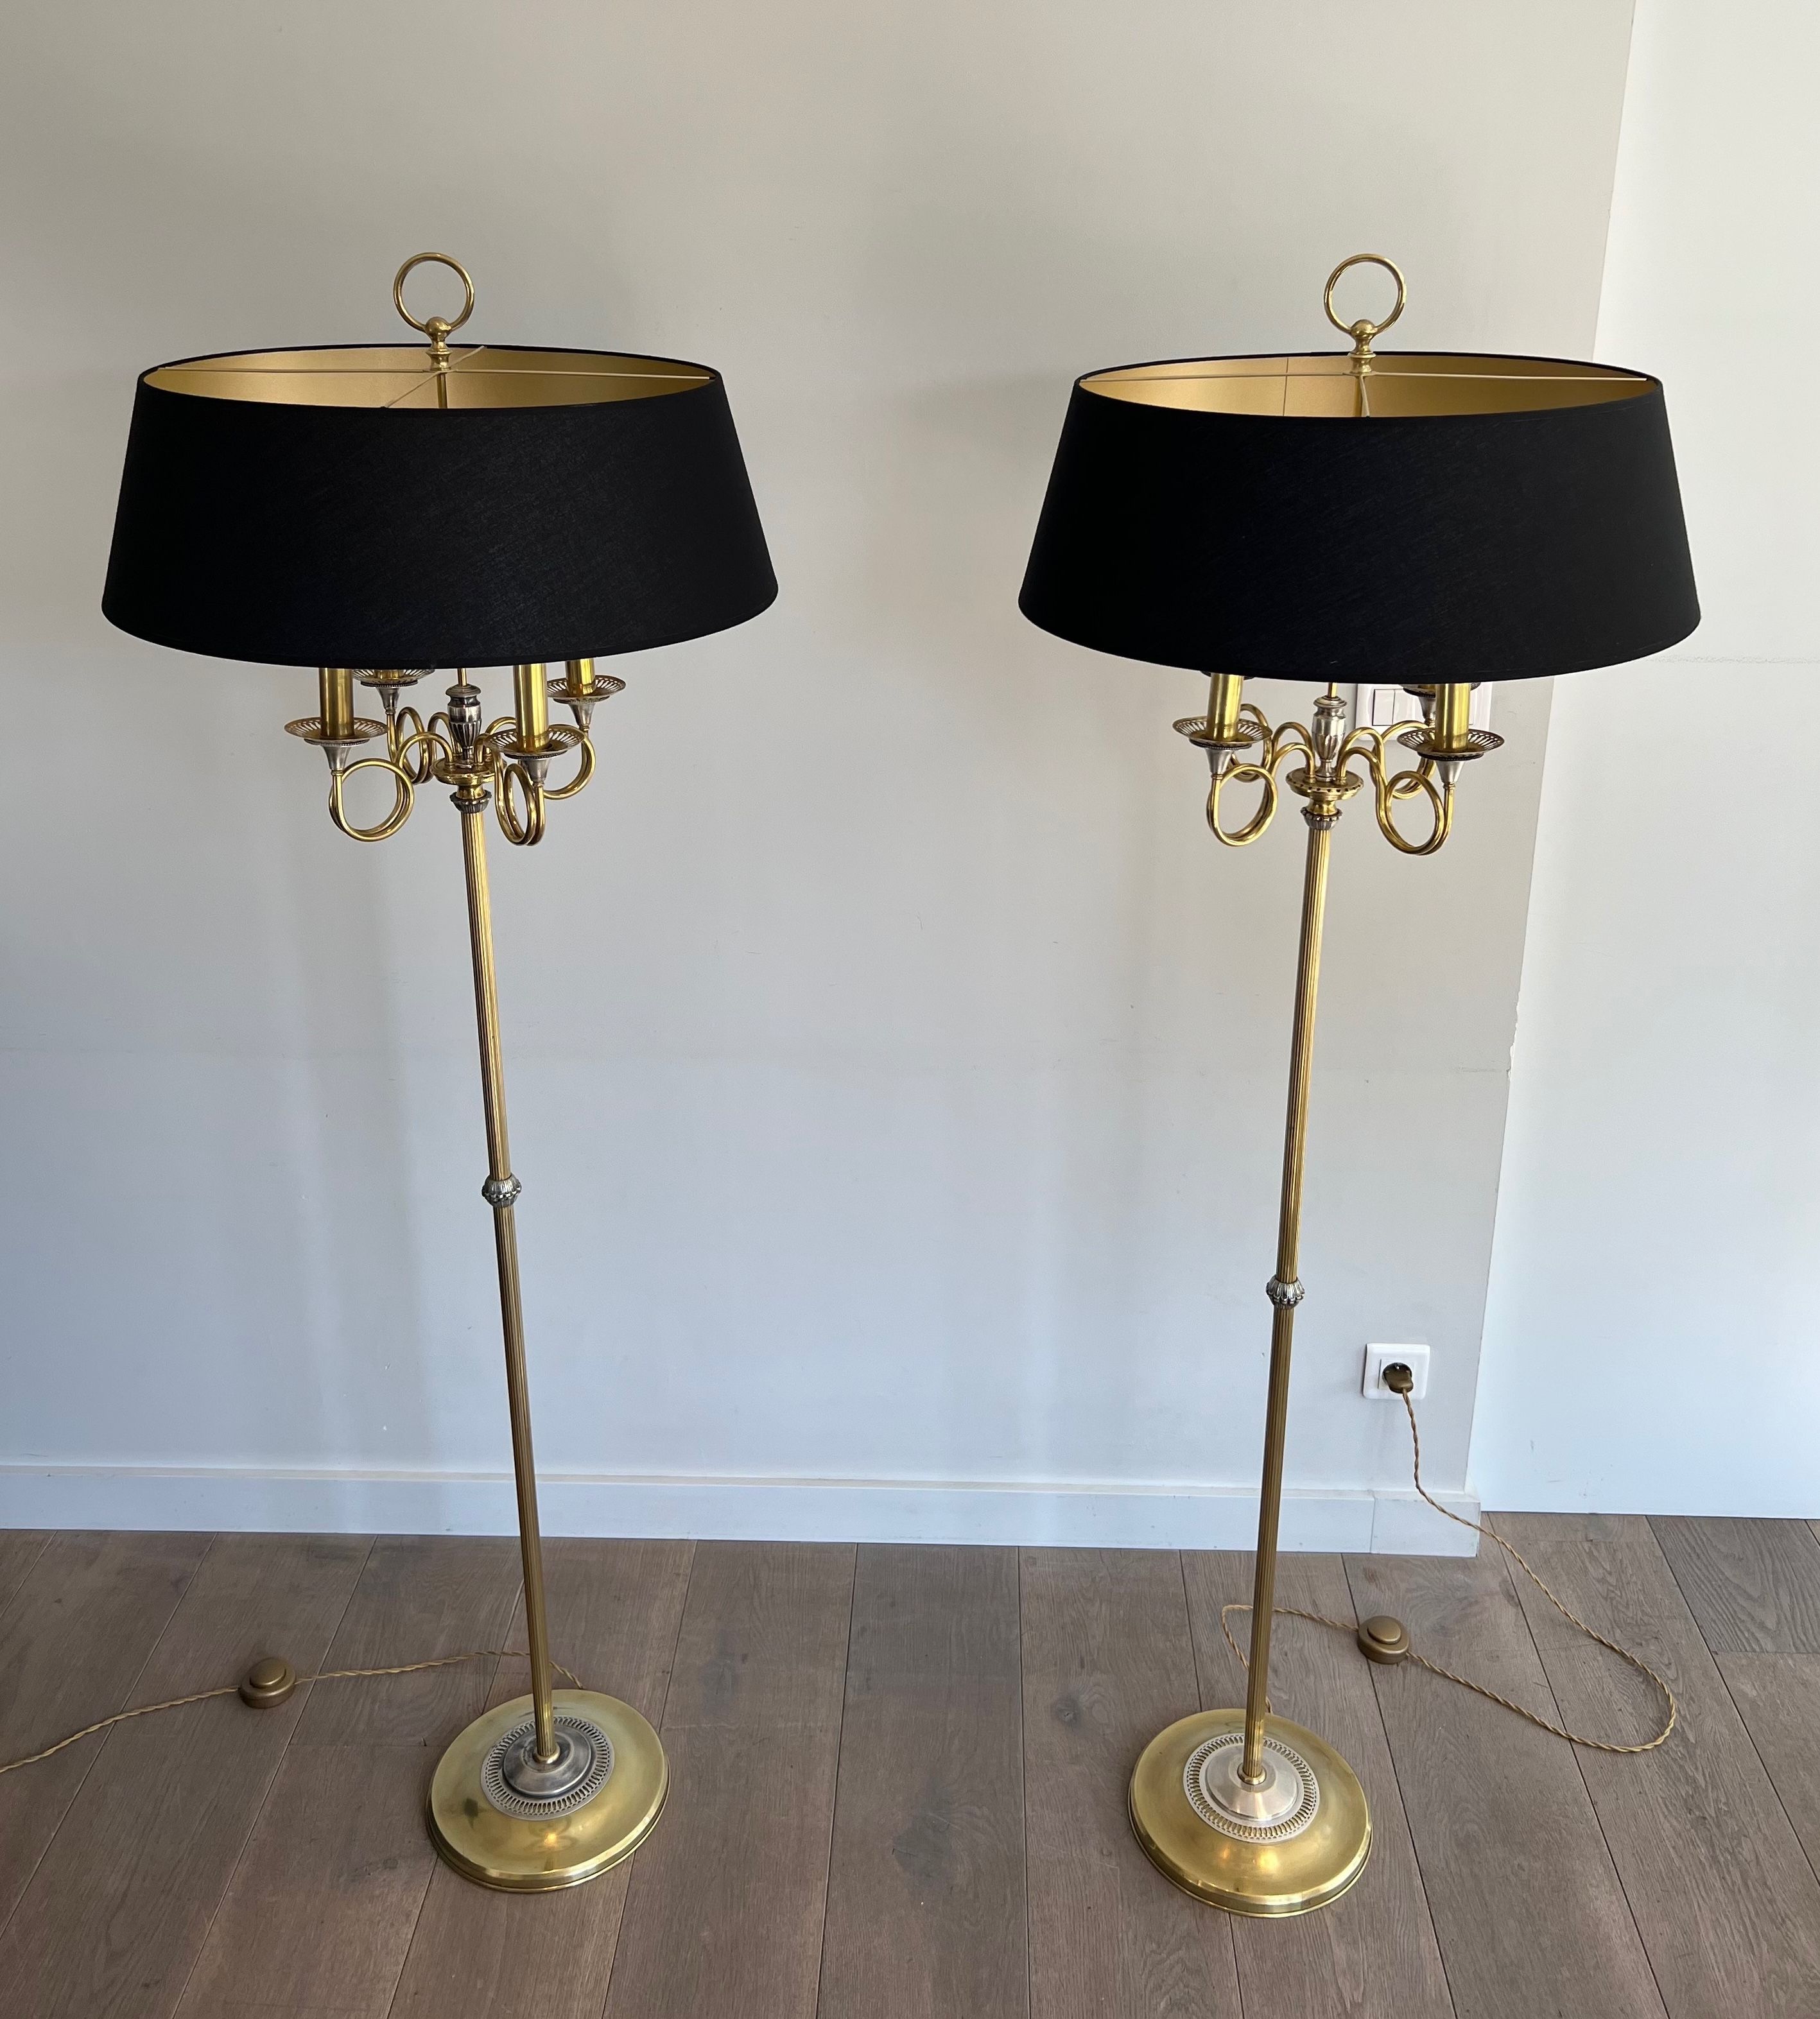 Pair of Neoclassical Brushed Steel and Brass Floor Lamp In the Style of Maison Charles